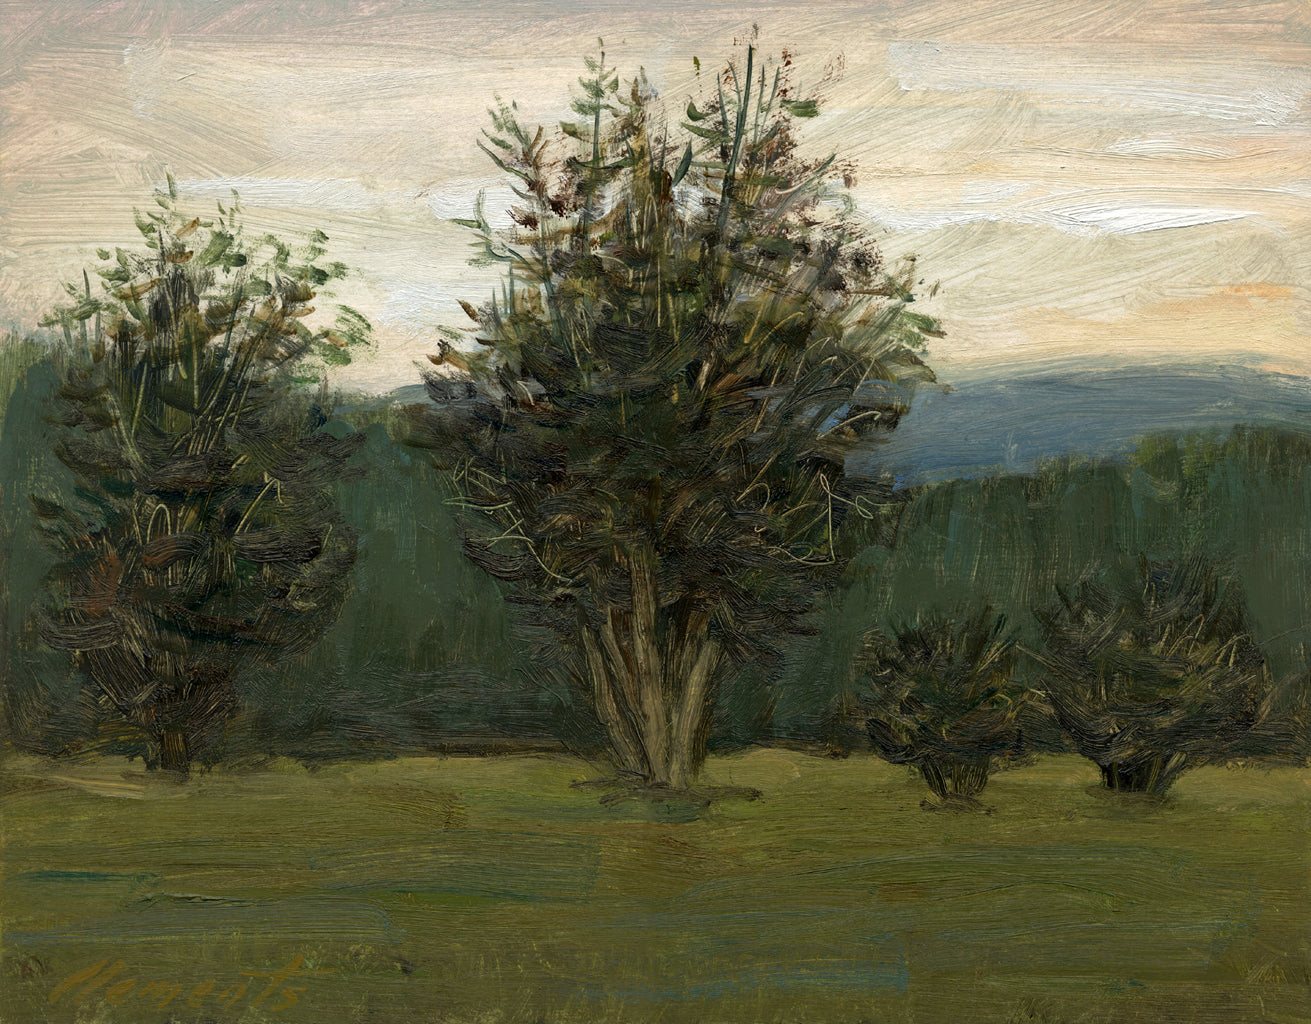 Four Trees Along a Hill Evening Painting Giclée Print